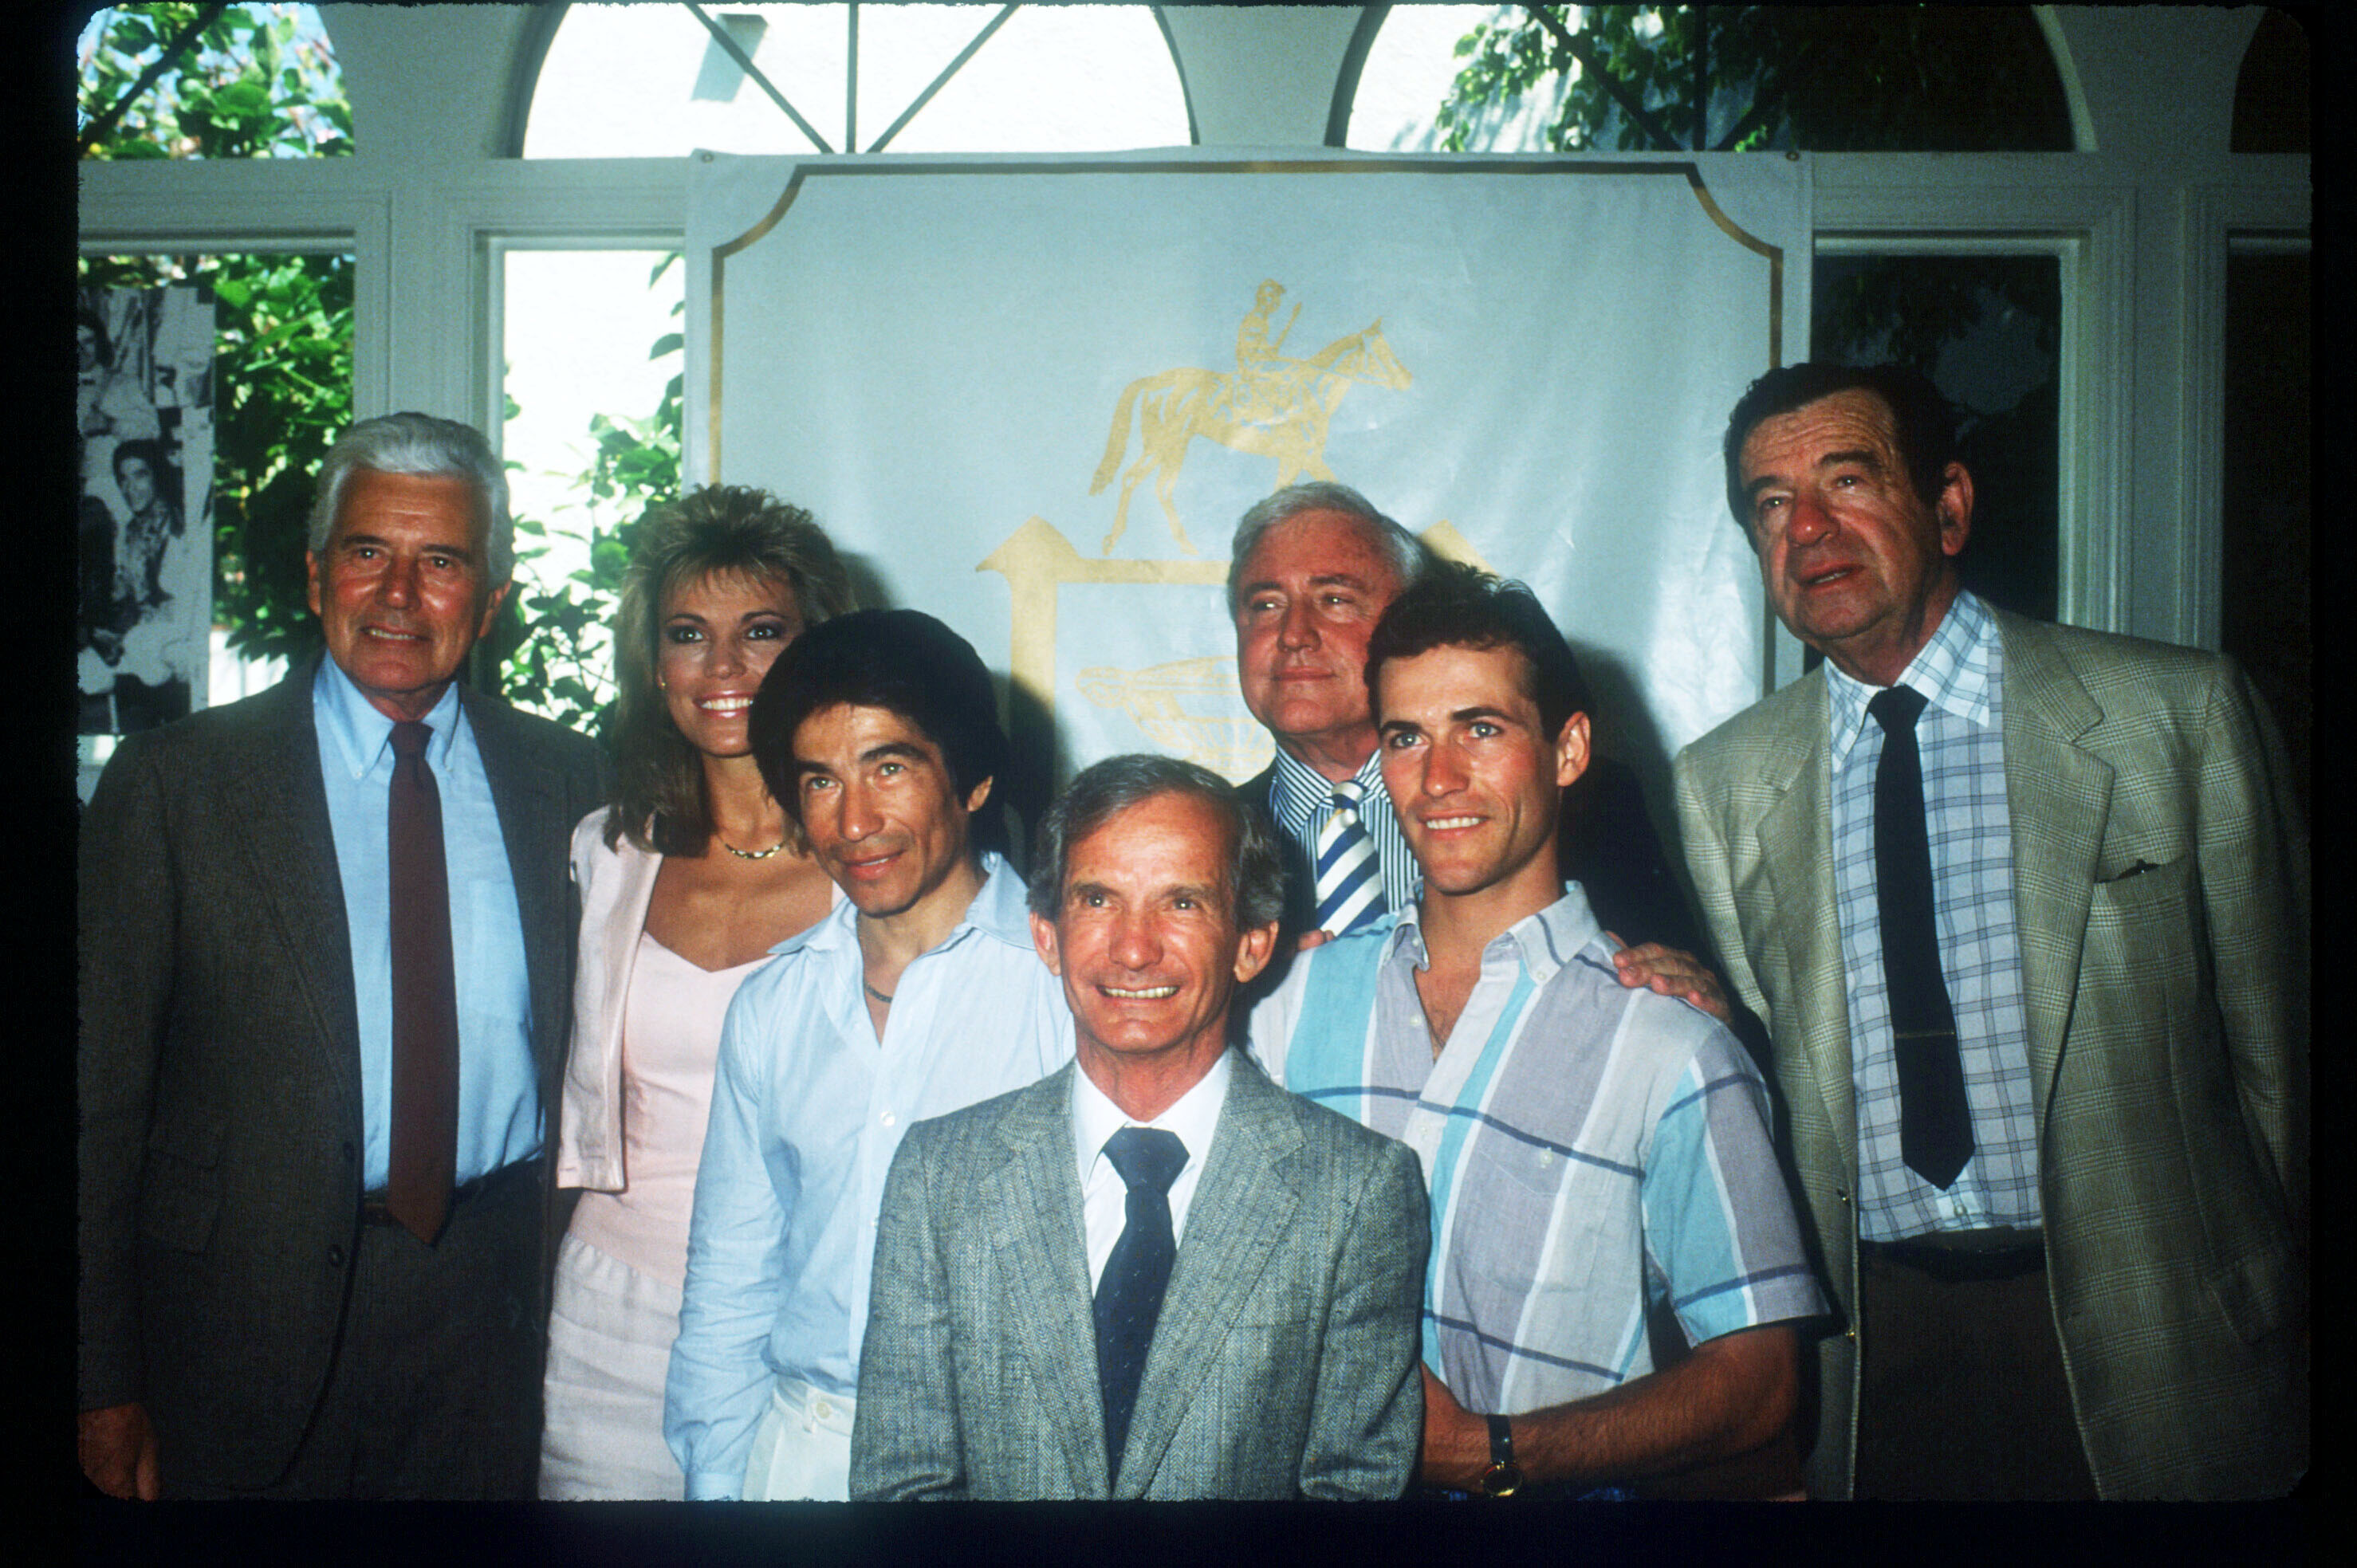 John Forsythe, Vanna White, Laffit Pincay Jr., Willie Shoemaker, Merv Griffin, Gary Stevens and Walter Matthau at the celebration for the fiftieth anniversary of the Hollywood Park race track in Los Angeles 1988 | Source: Getty Images